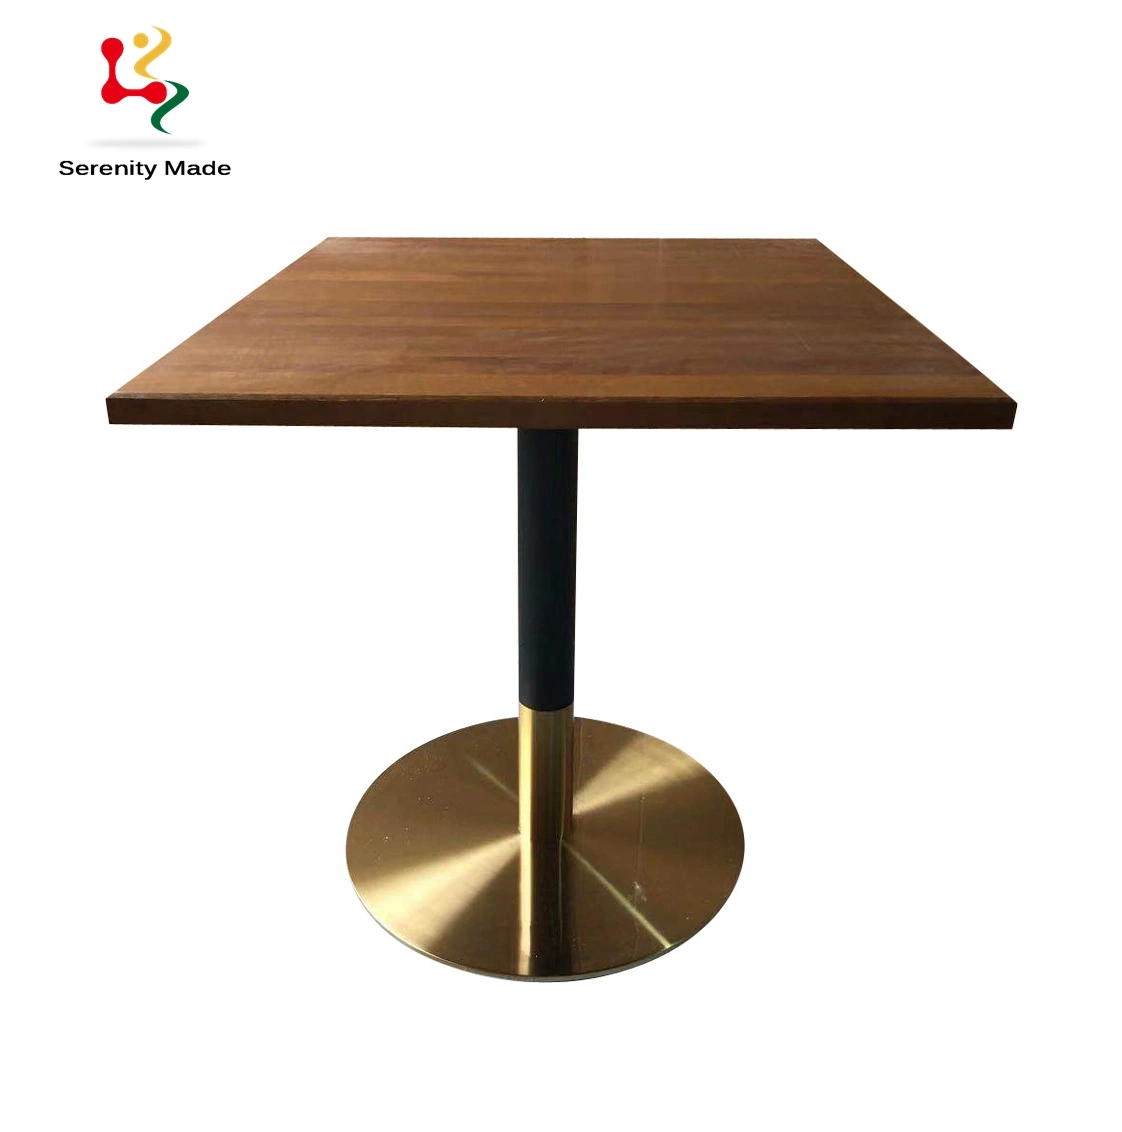 Commercial Cafe Furniture Solid Ash Wood Dining Table Top with Brass Table Base